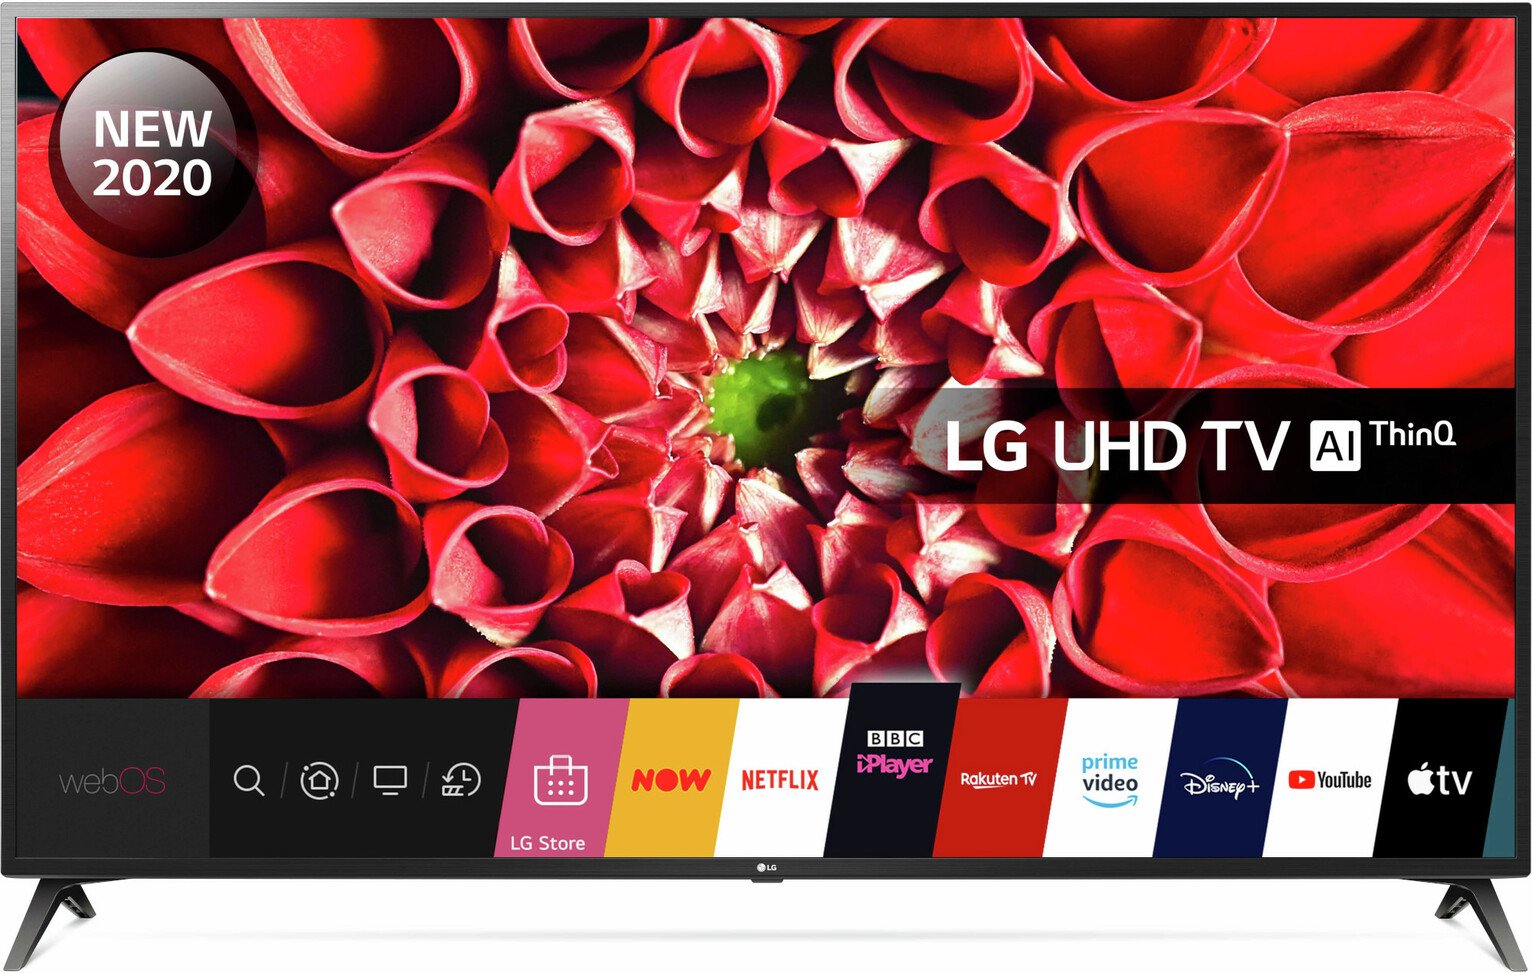 LG 60 Inch 60UN7100 Smart 4K Ultra HD LED TV with HDR Review